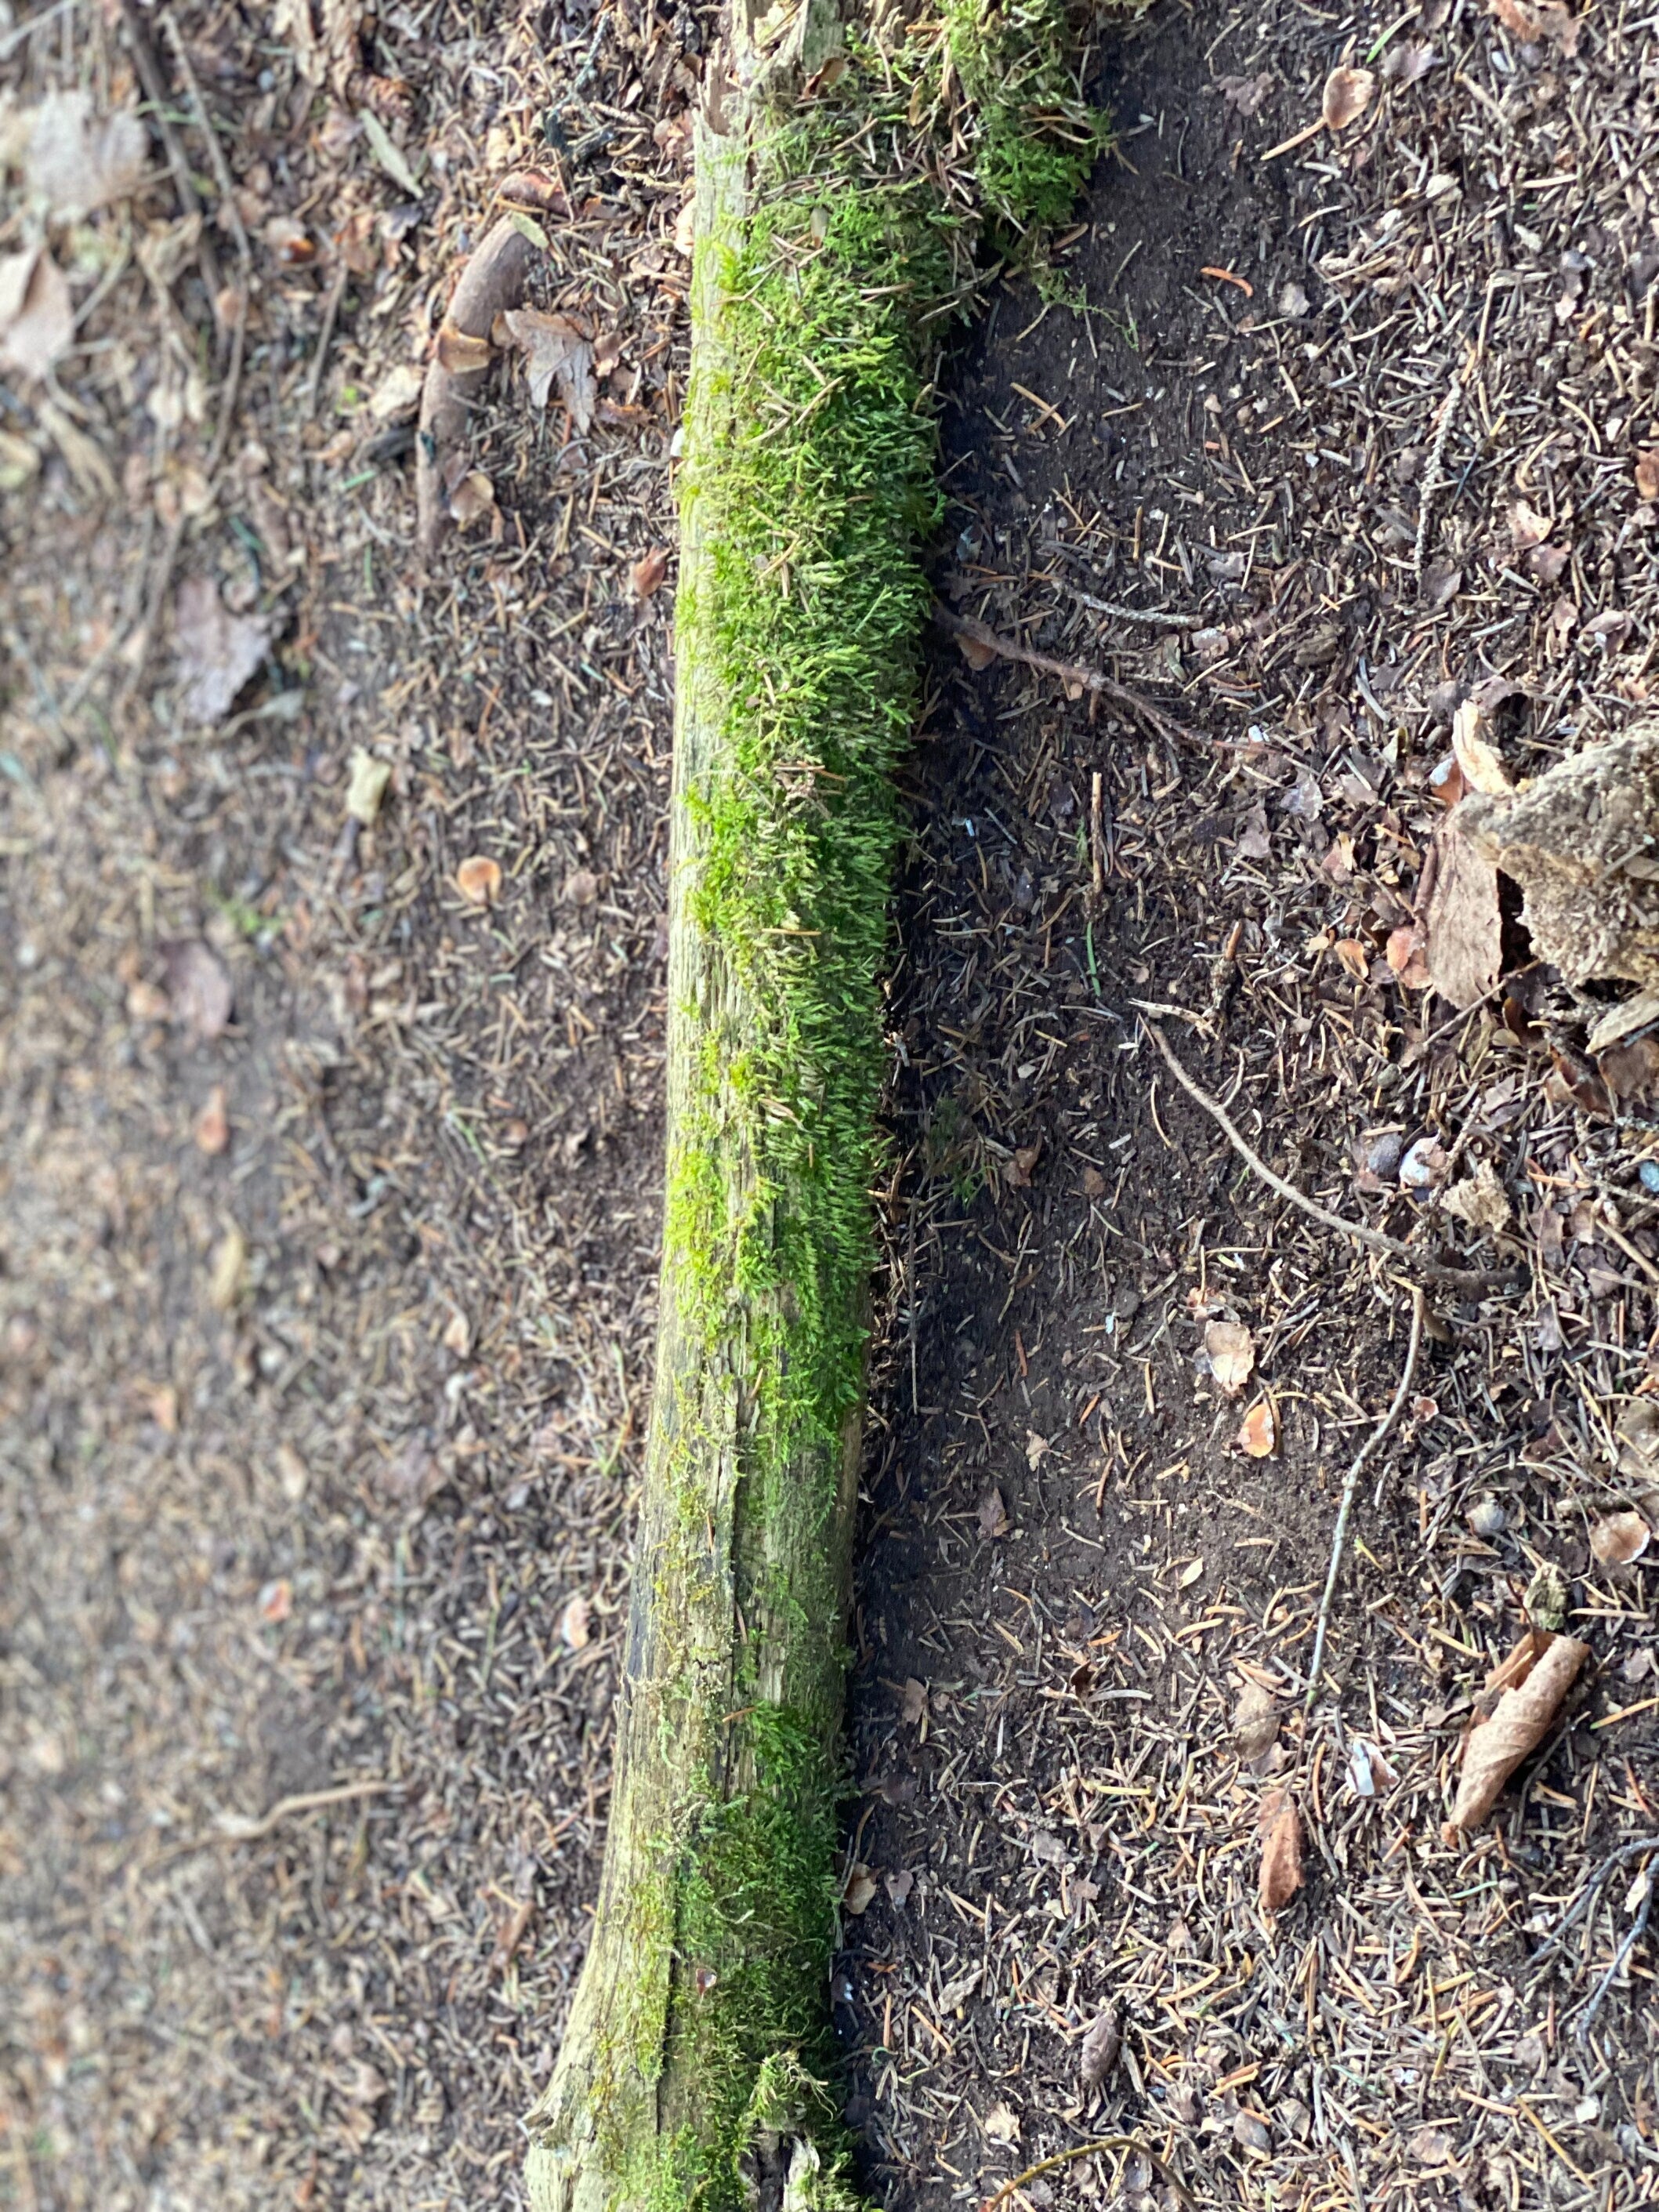 Moss Covered Log, Mossy Log, 25 Inches Long by 3 Inches Wide and 2 Inches High